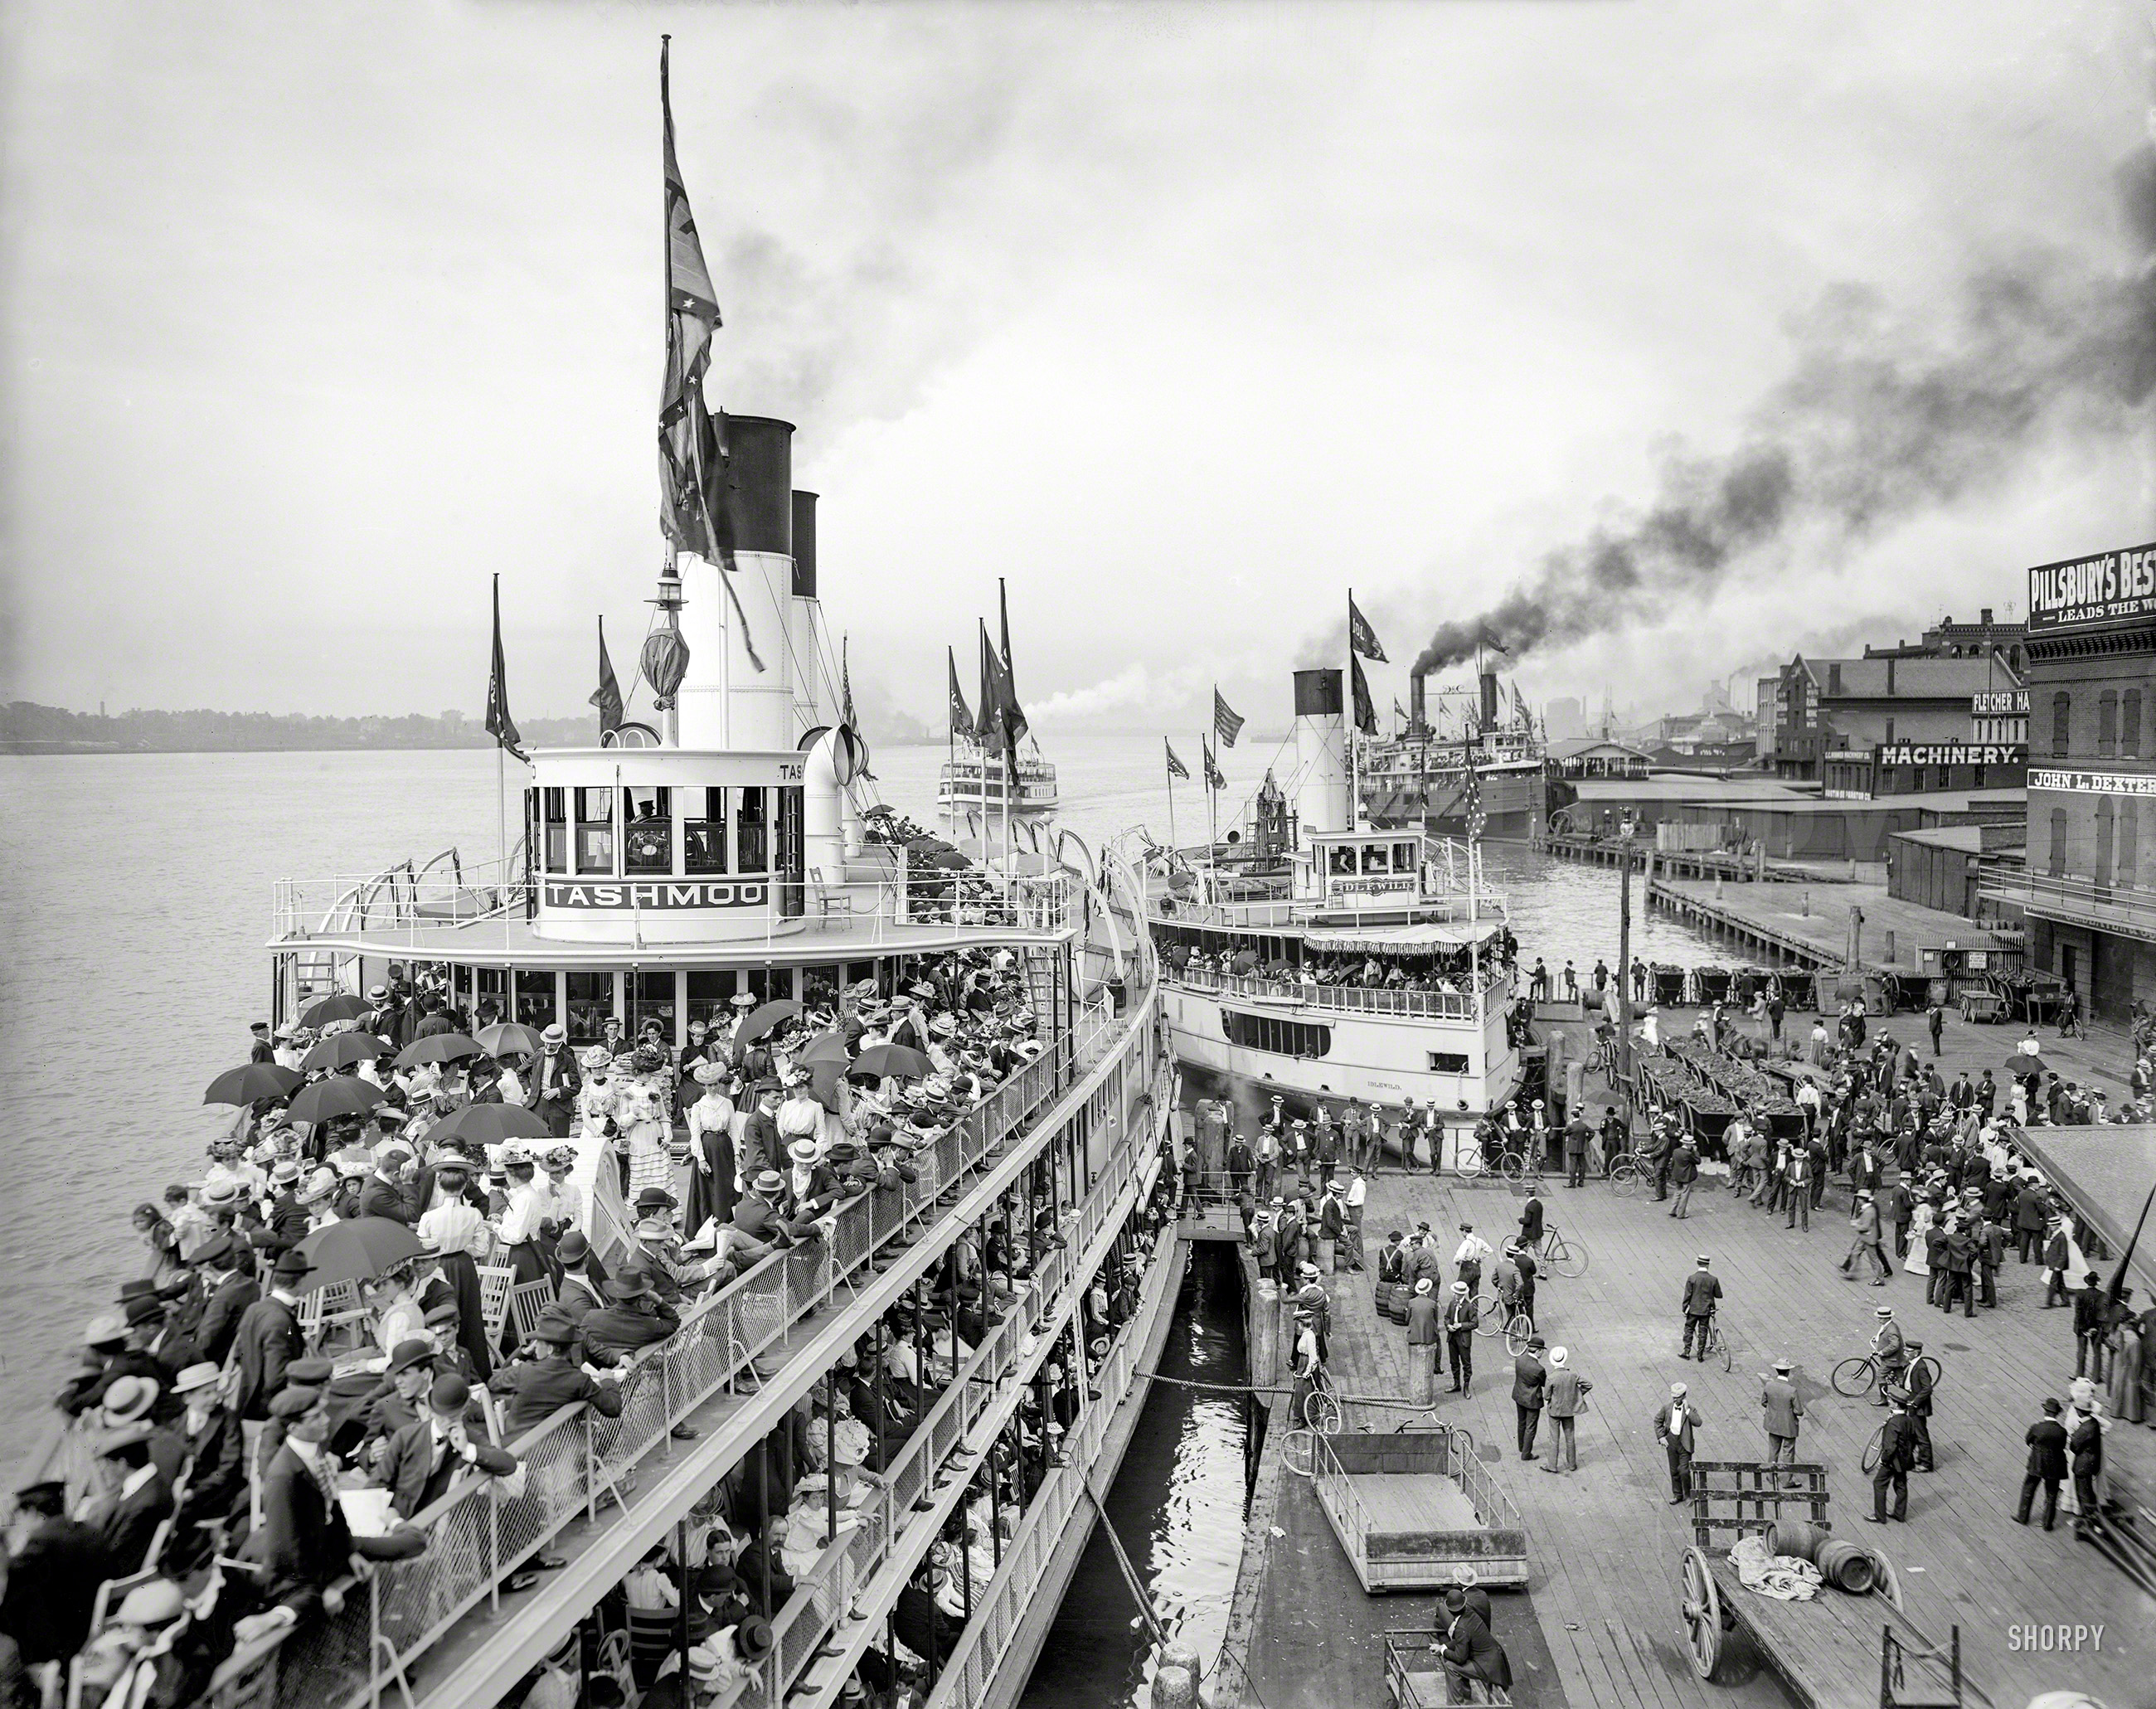 Circa 1901. "Excursion steamers Tashmoo and Idlewild at wharves." At least our third look at these day-trippers tied up at the Detroit River wharf, in a sort of Shorpy version of "Groundhog Day." 8x10 inch glass negative. View full size.